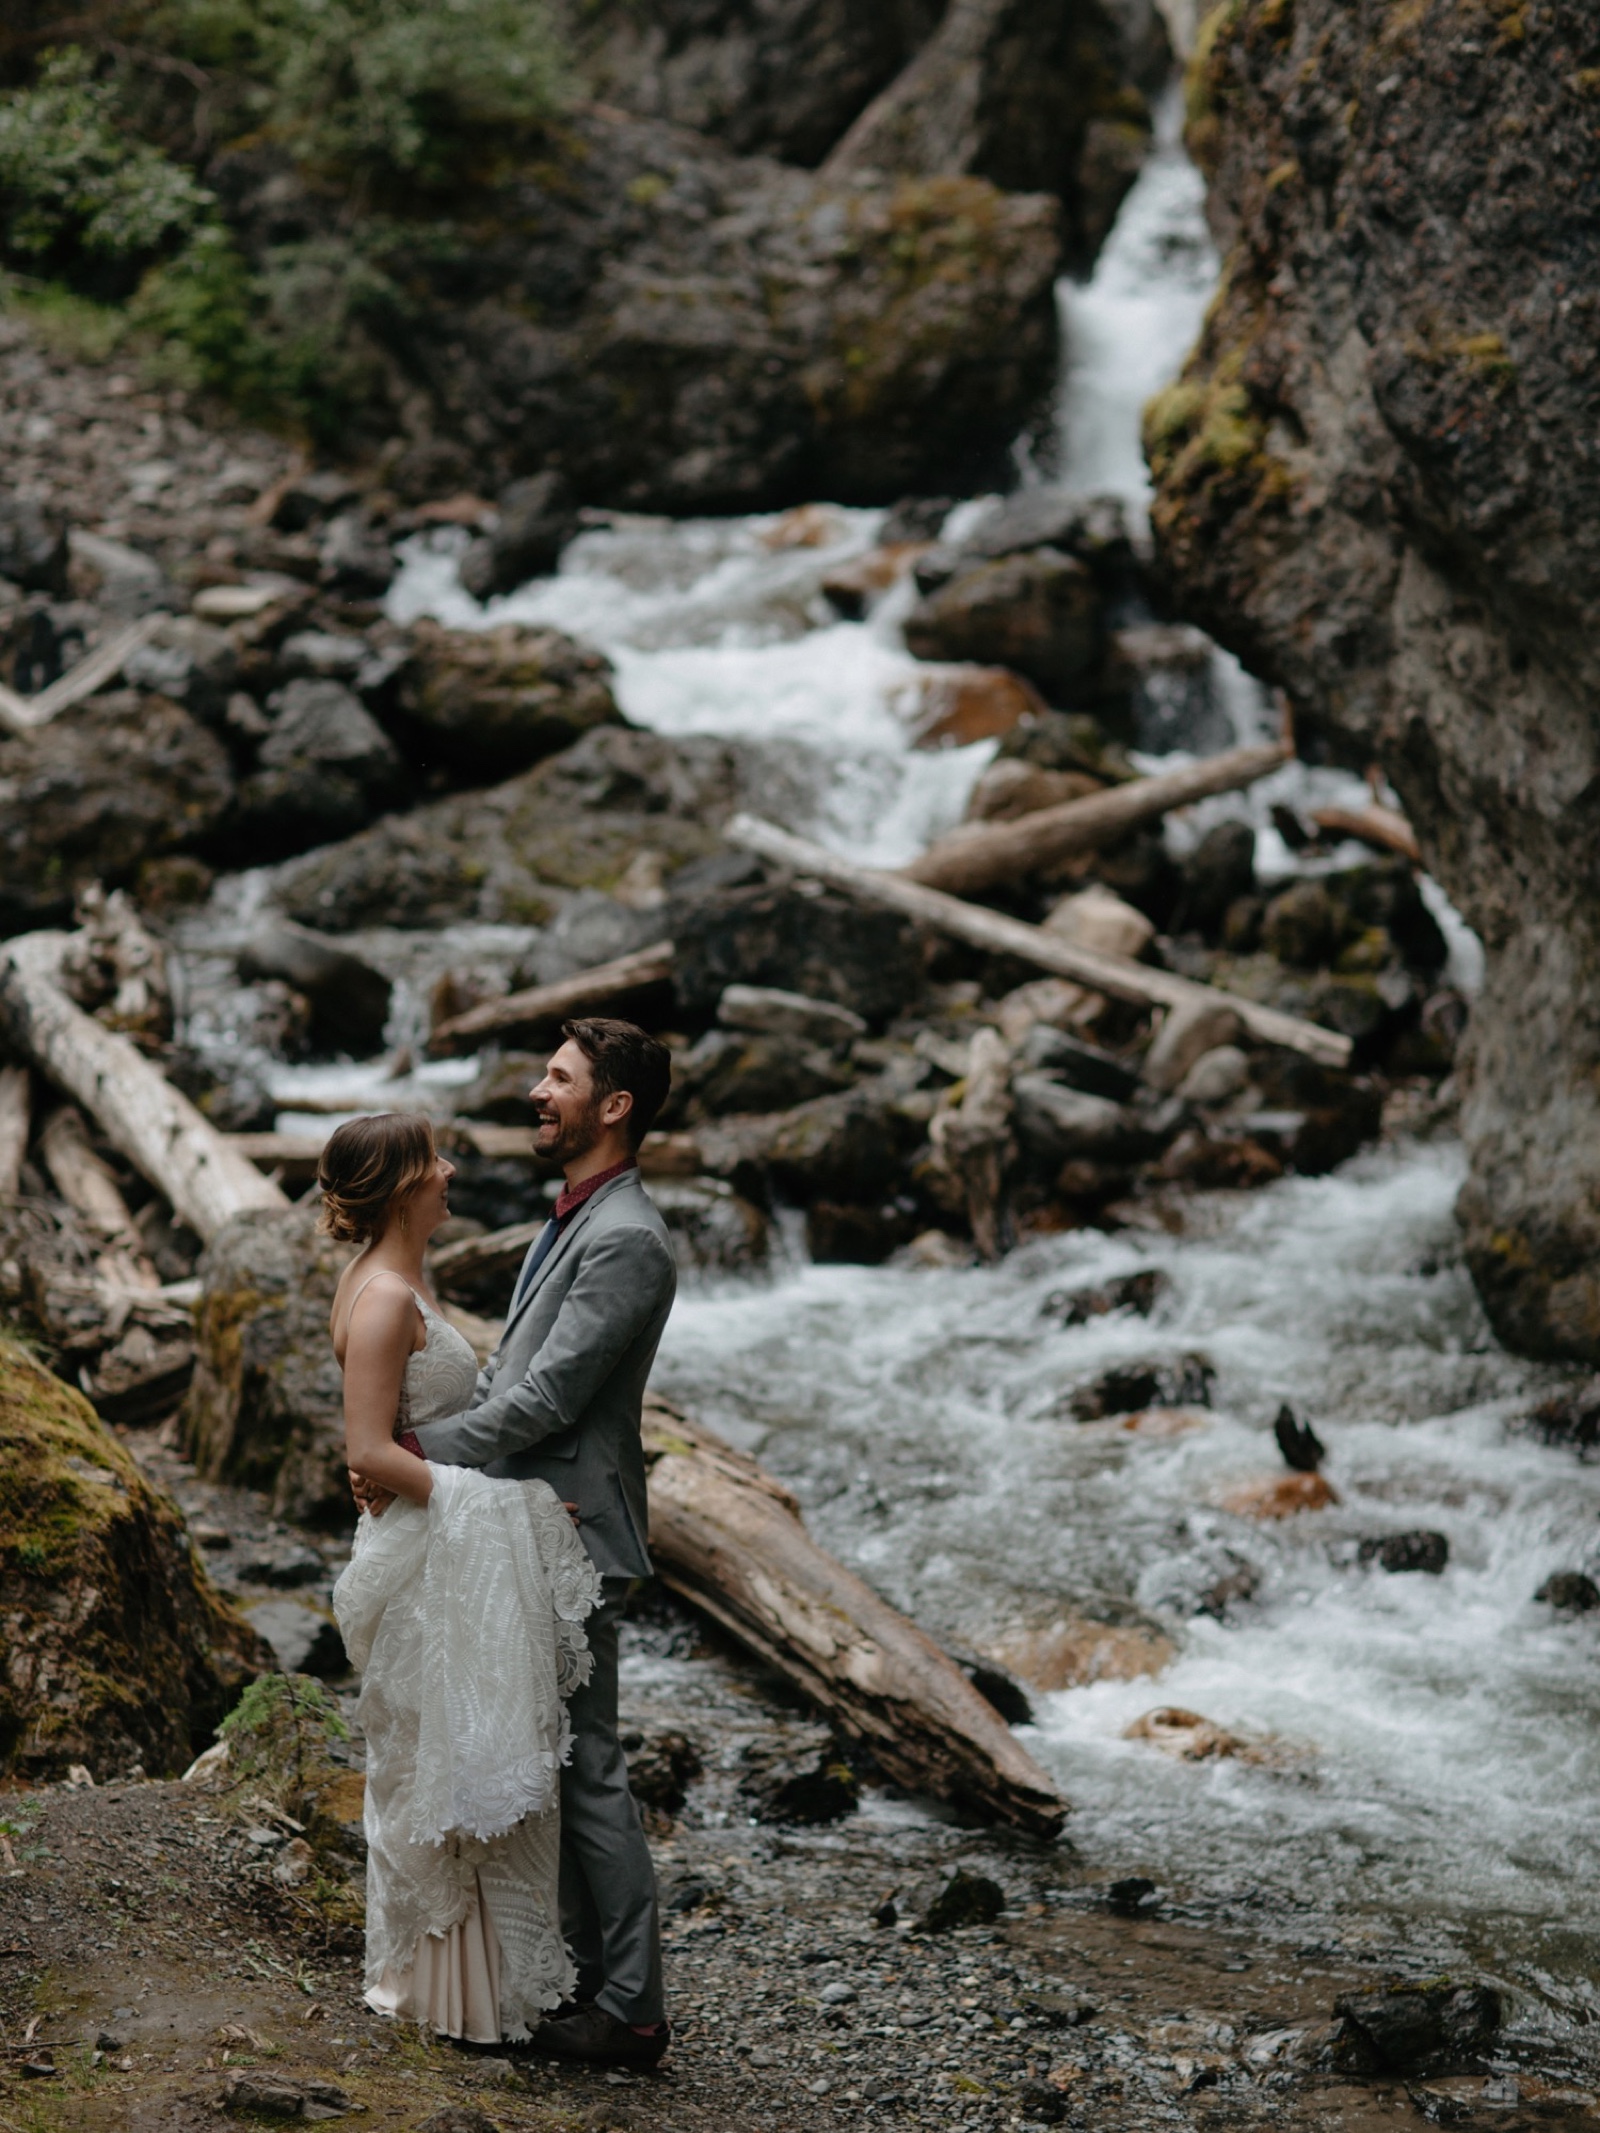 Waterfall backdrop in a canyon for this Banff wedding couple